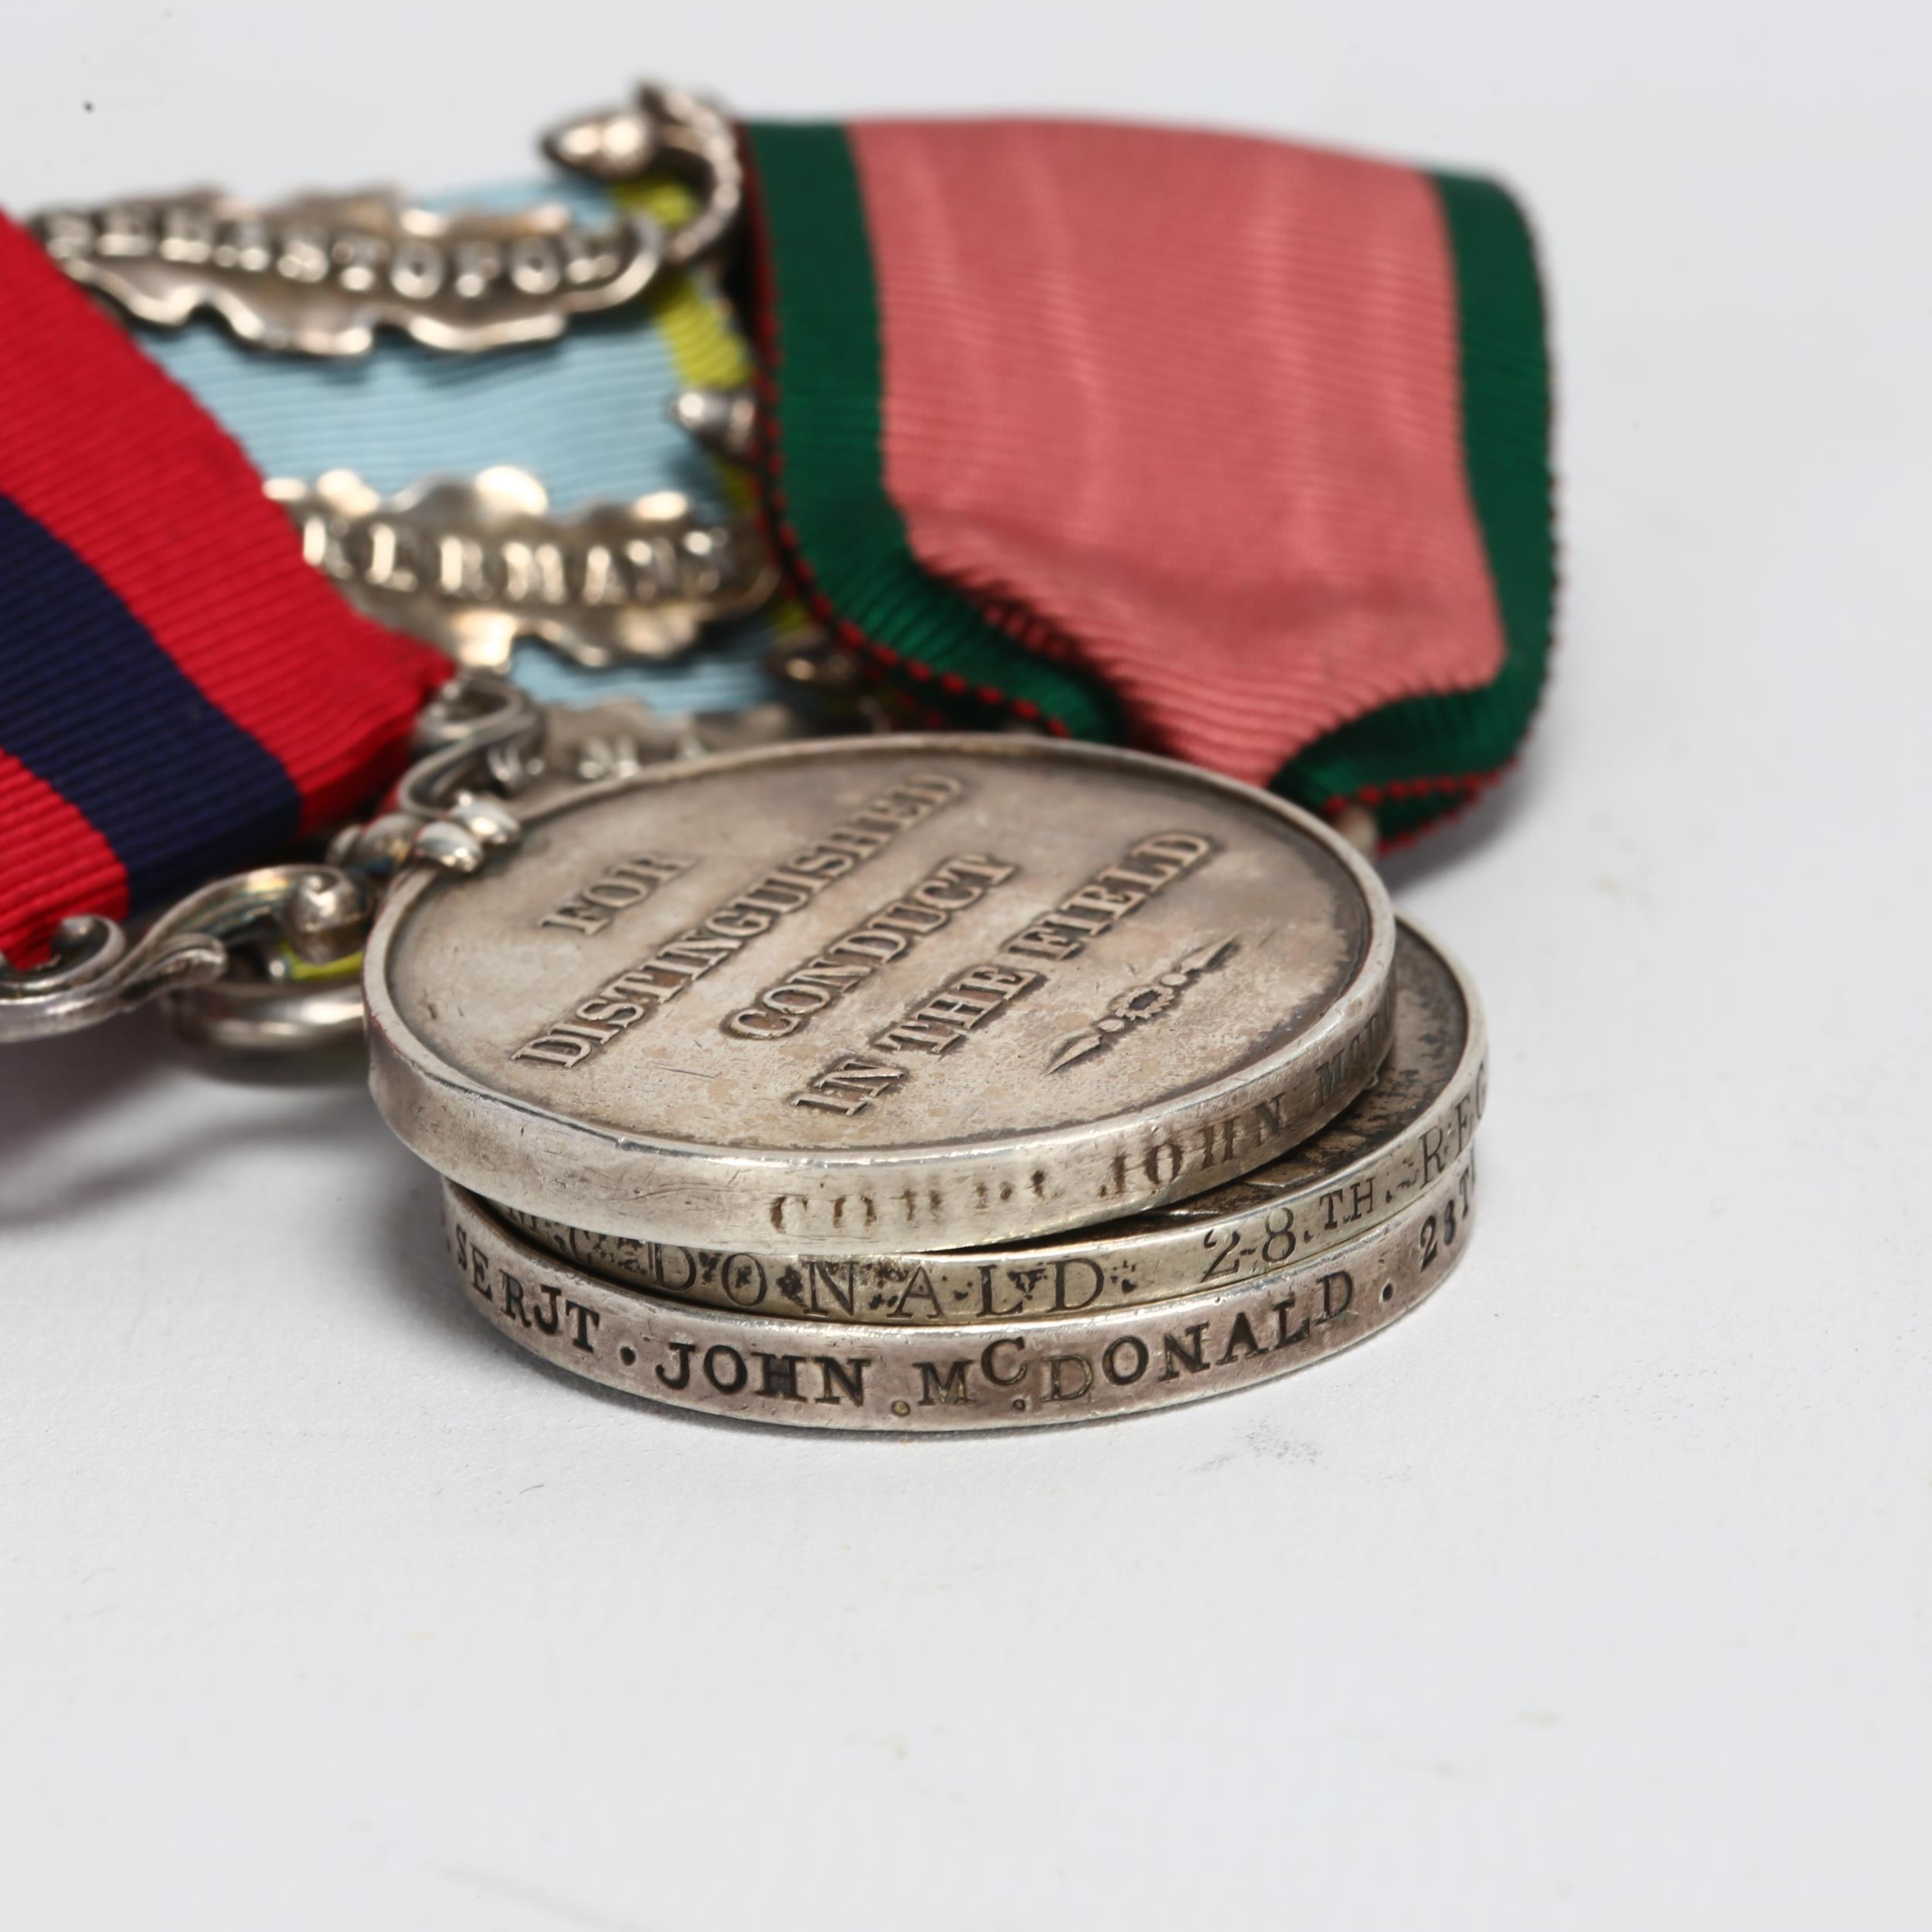 A Distinguished Conduct Medal group awarded to 3033 Col.R Sergt J McDonald 28th Regiment, - Image 3 of 3